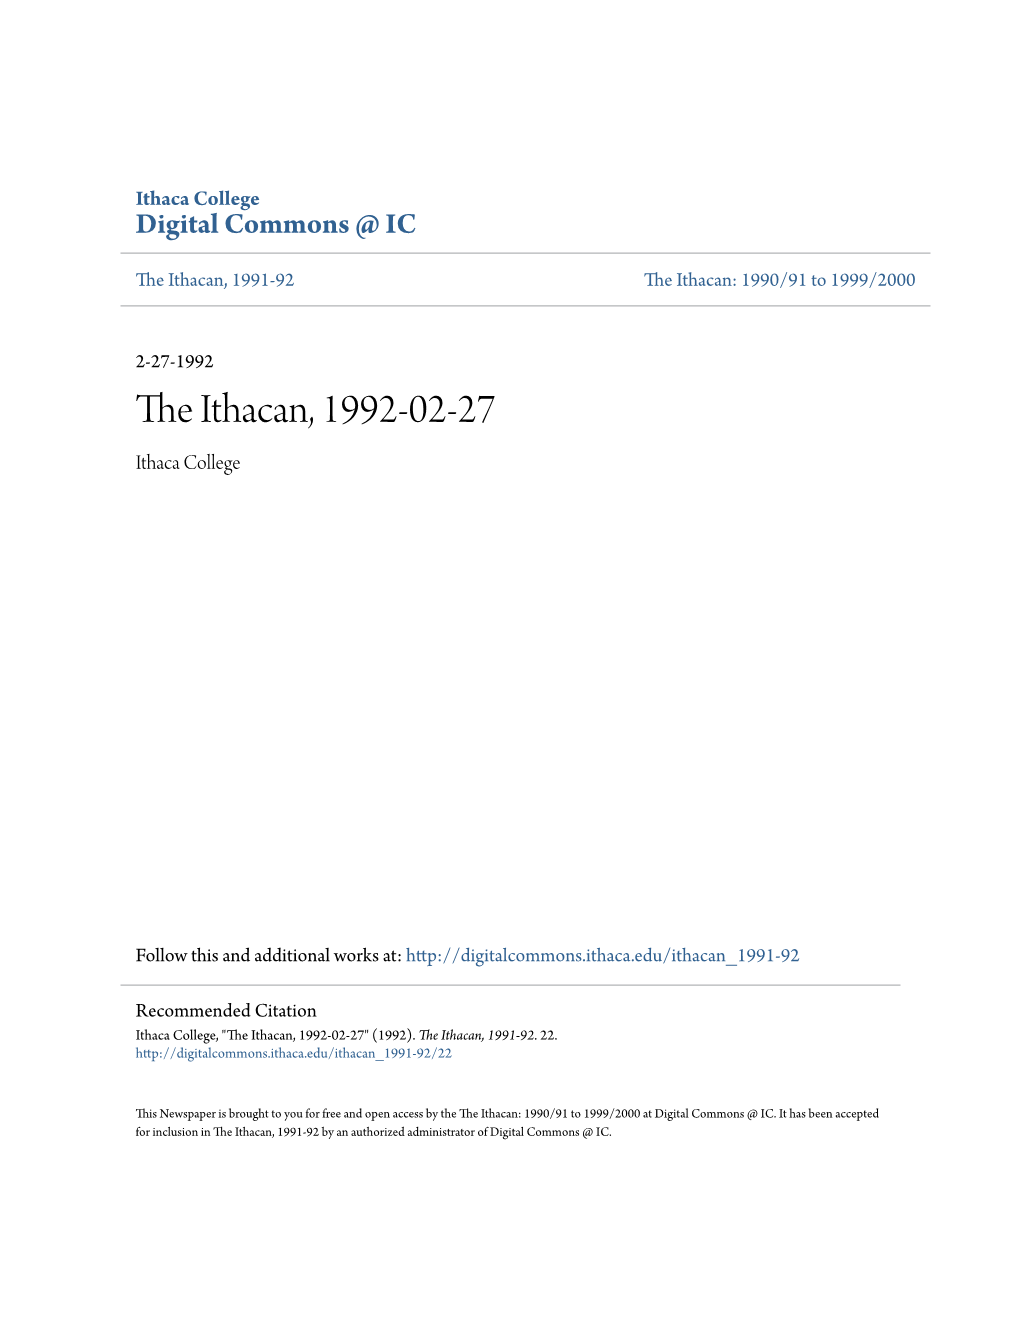 The Ithacan, 1992-02-27